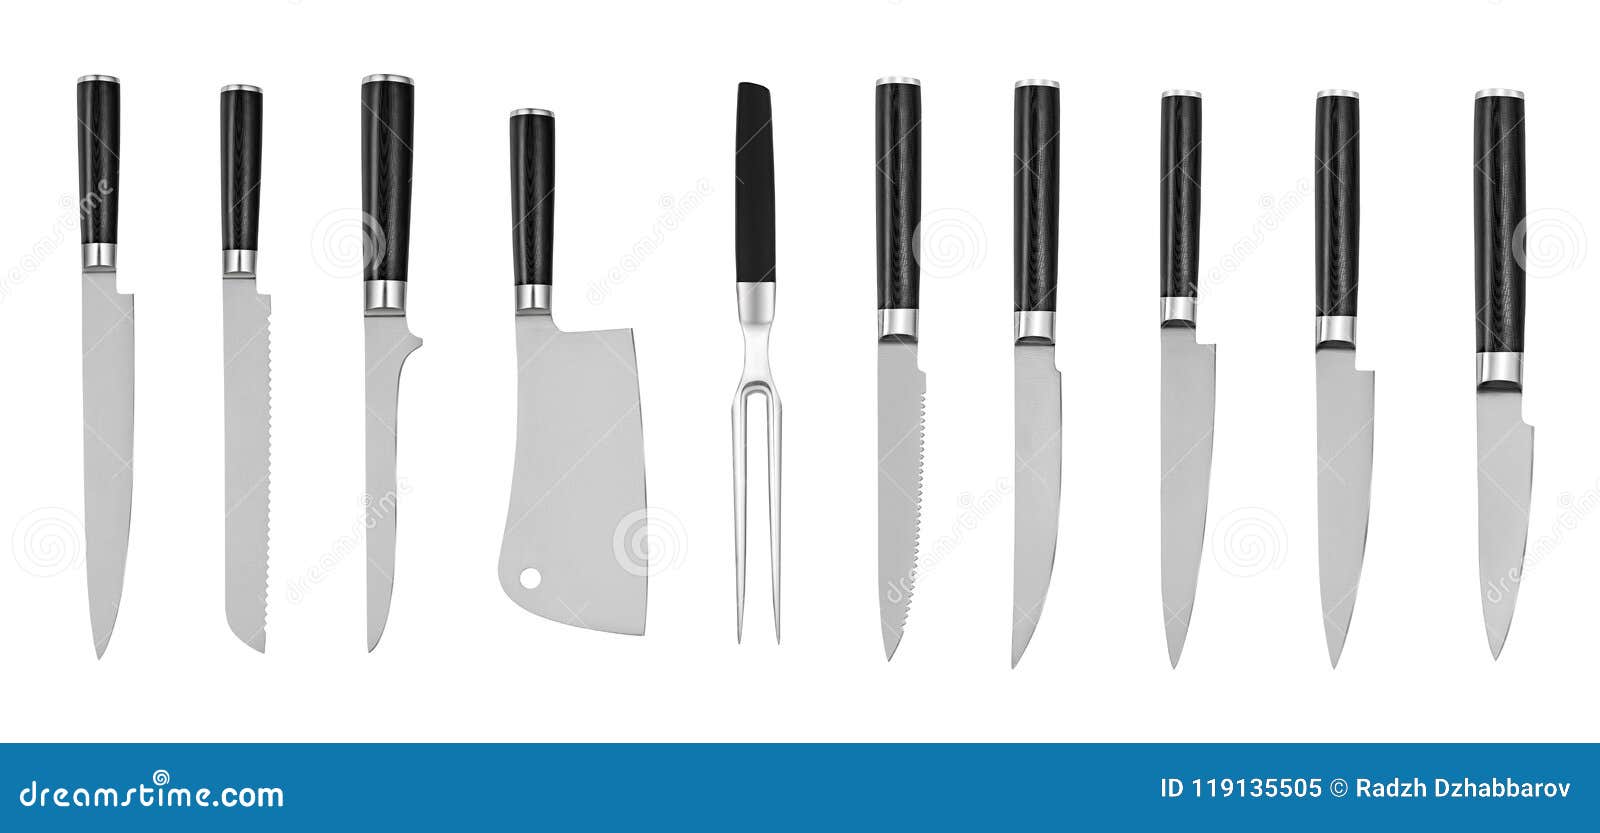 set of steel kitchen knives,  on white background with clipping path. chef knife